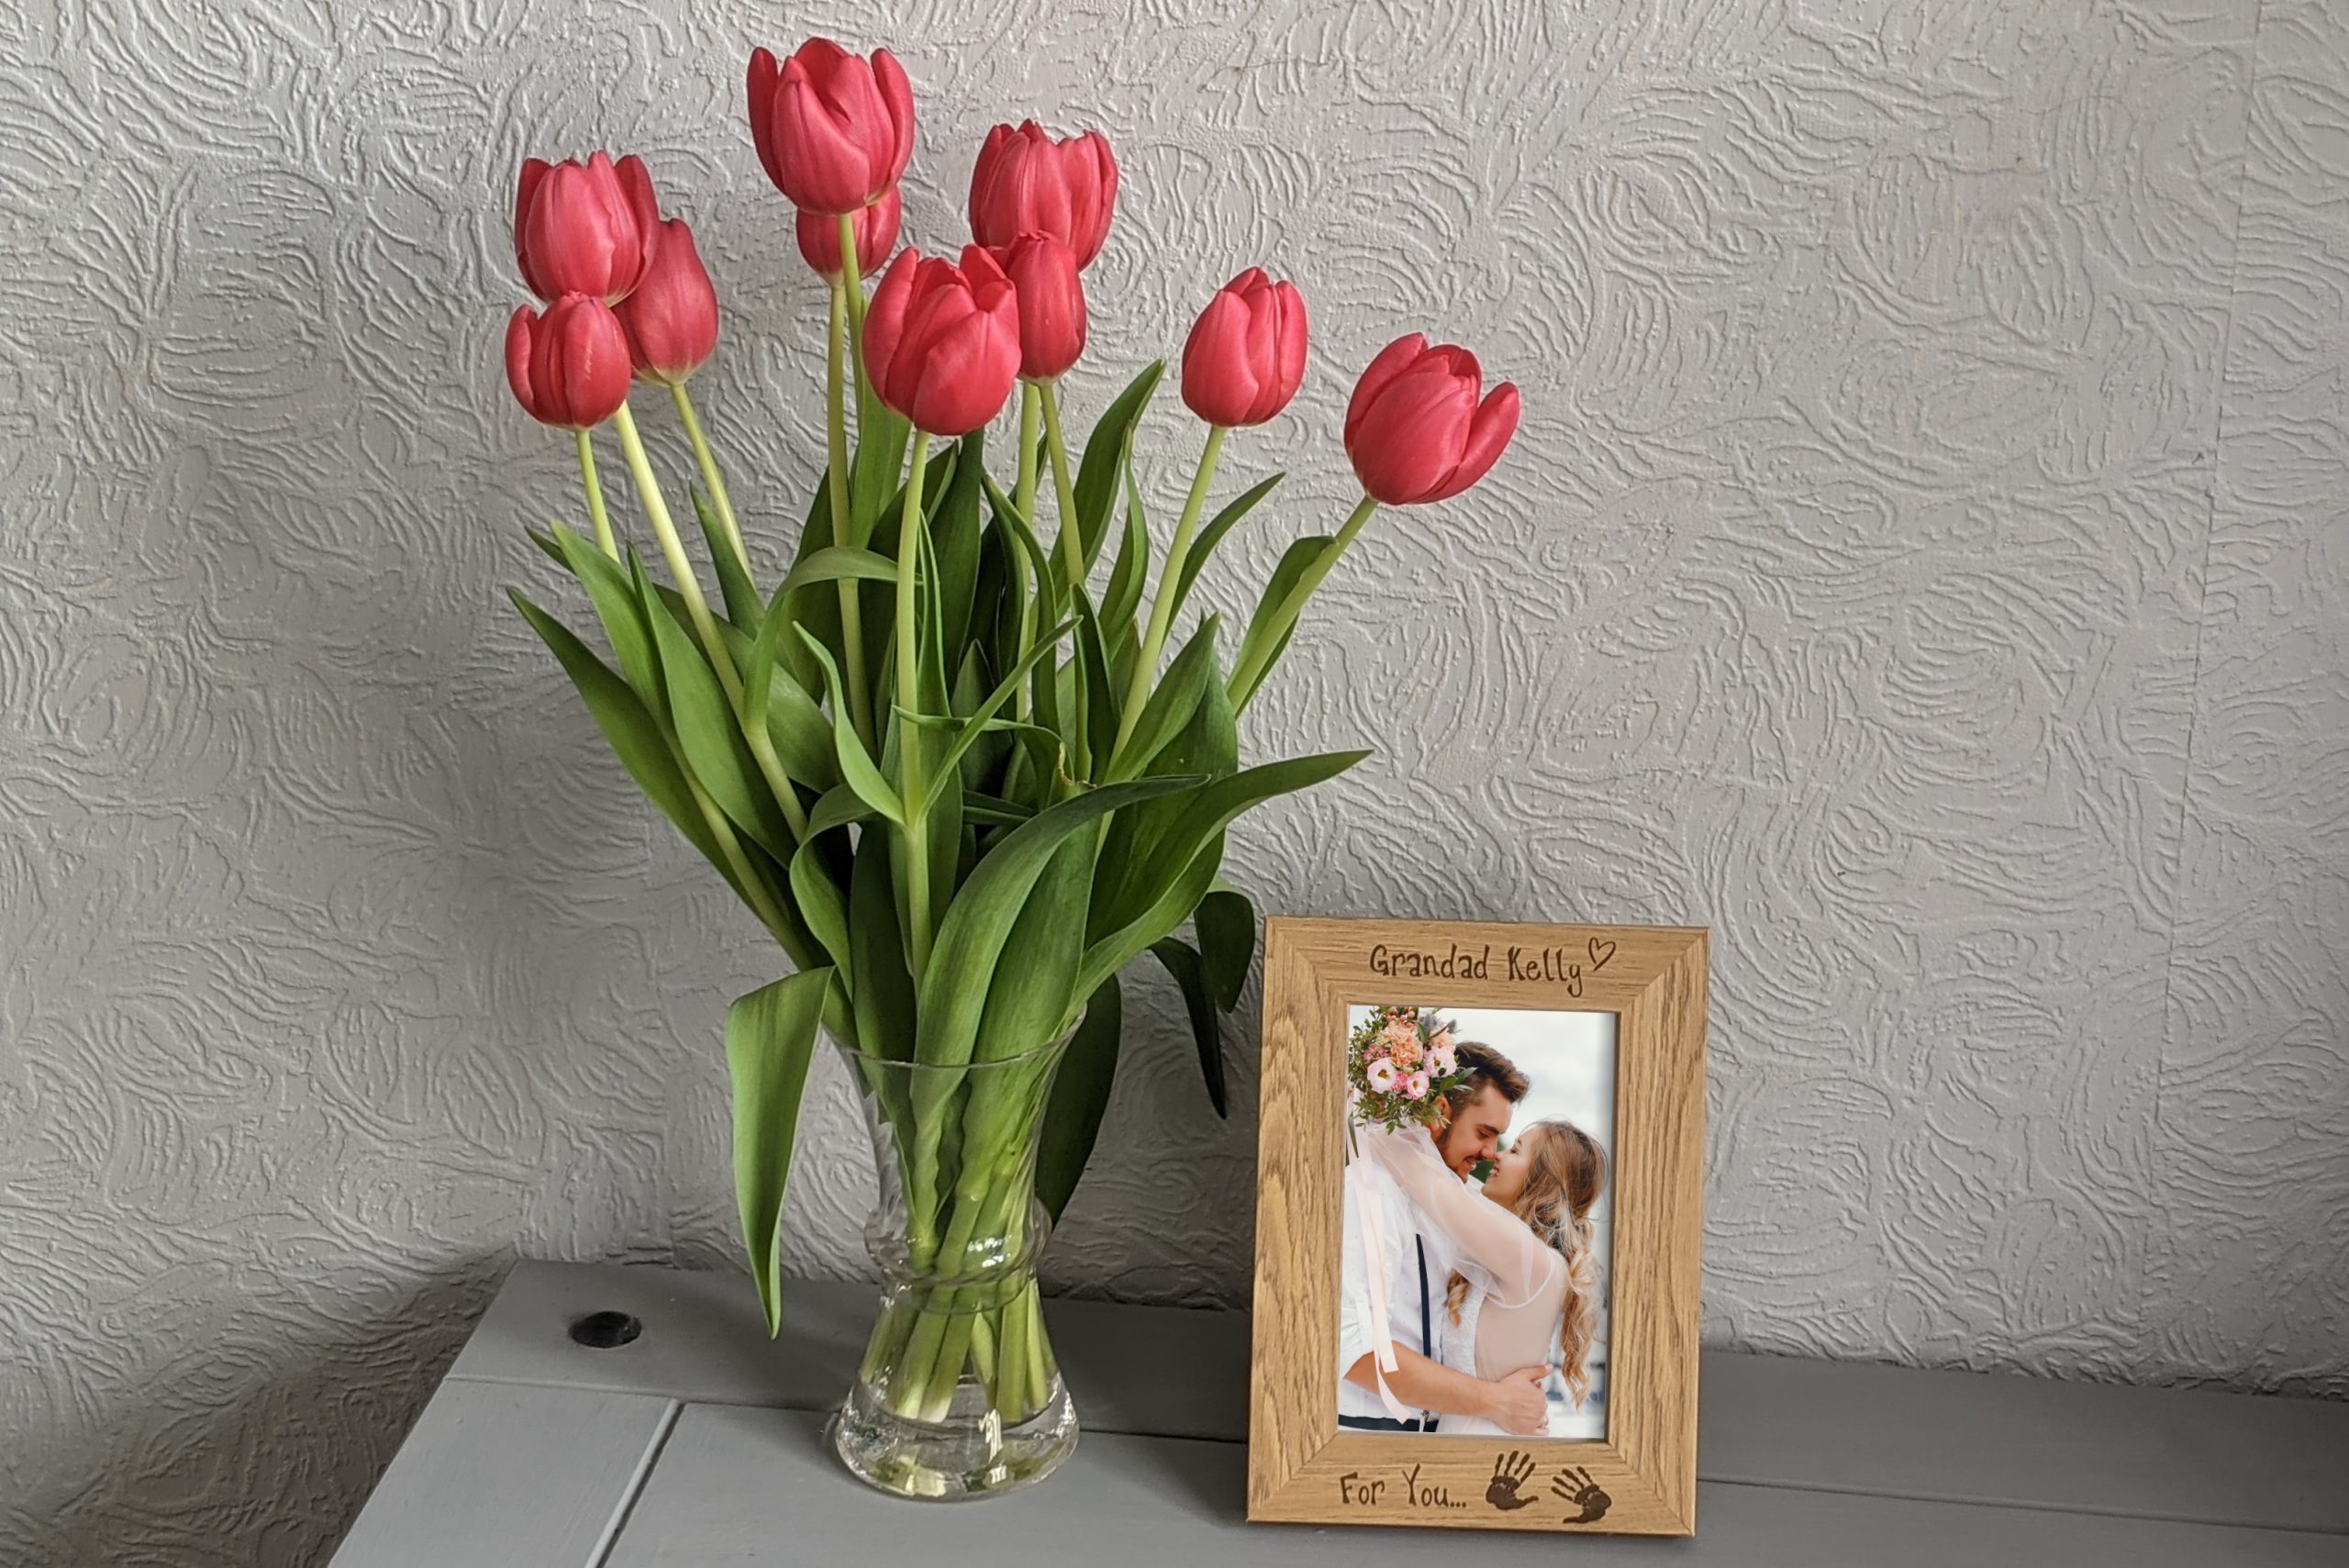 An oak veneer photograph frame. It has been personalised with text etched on the frame